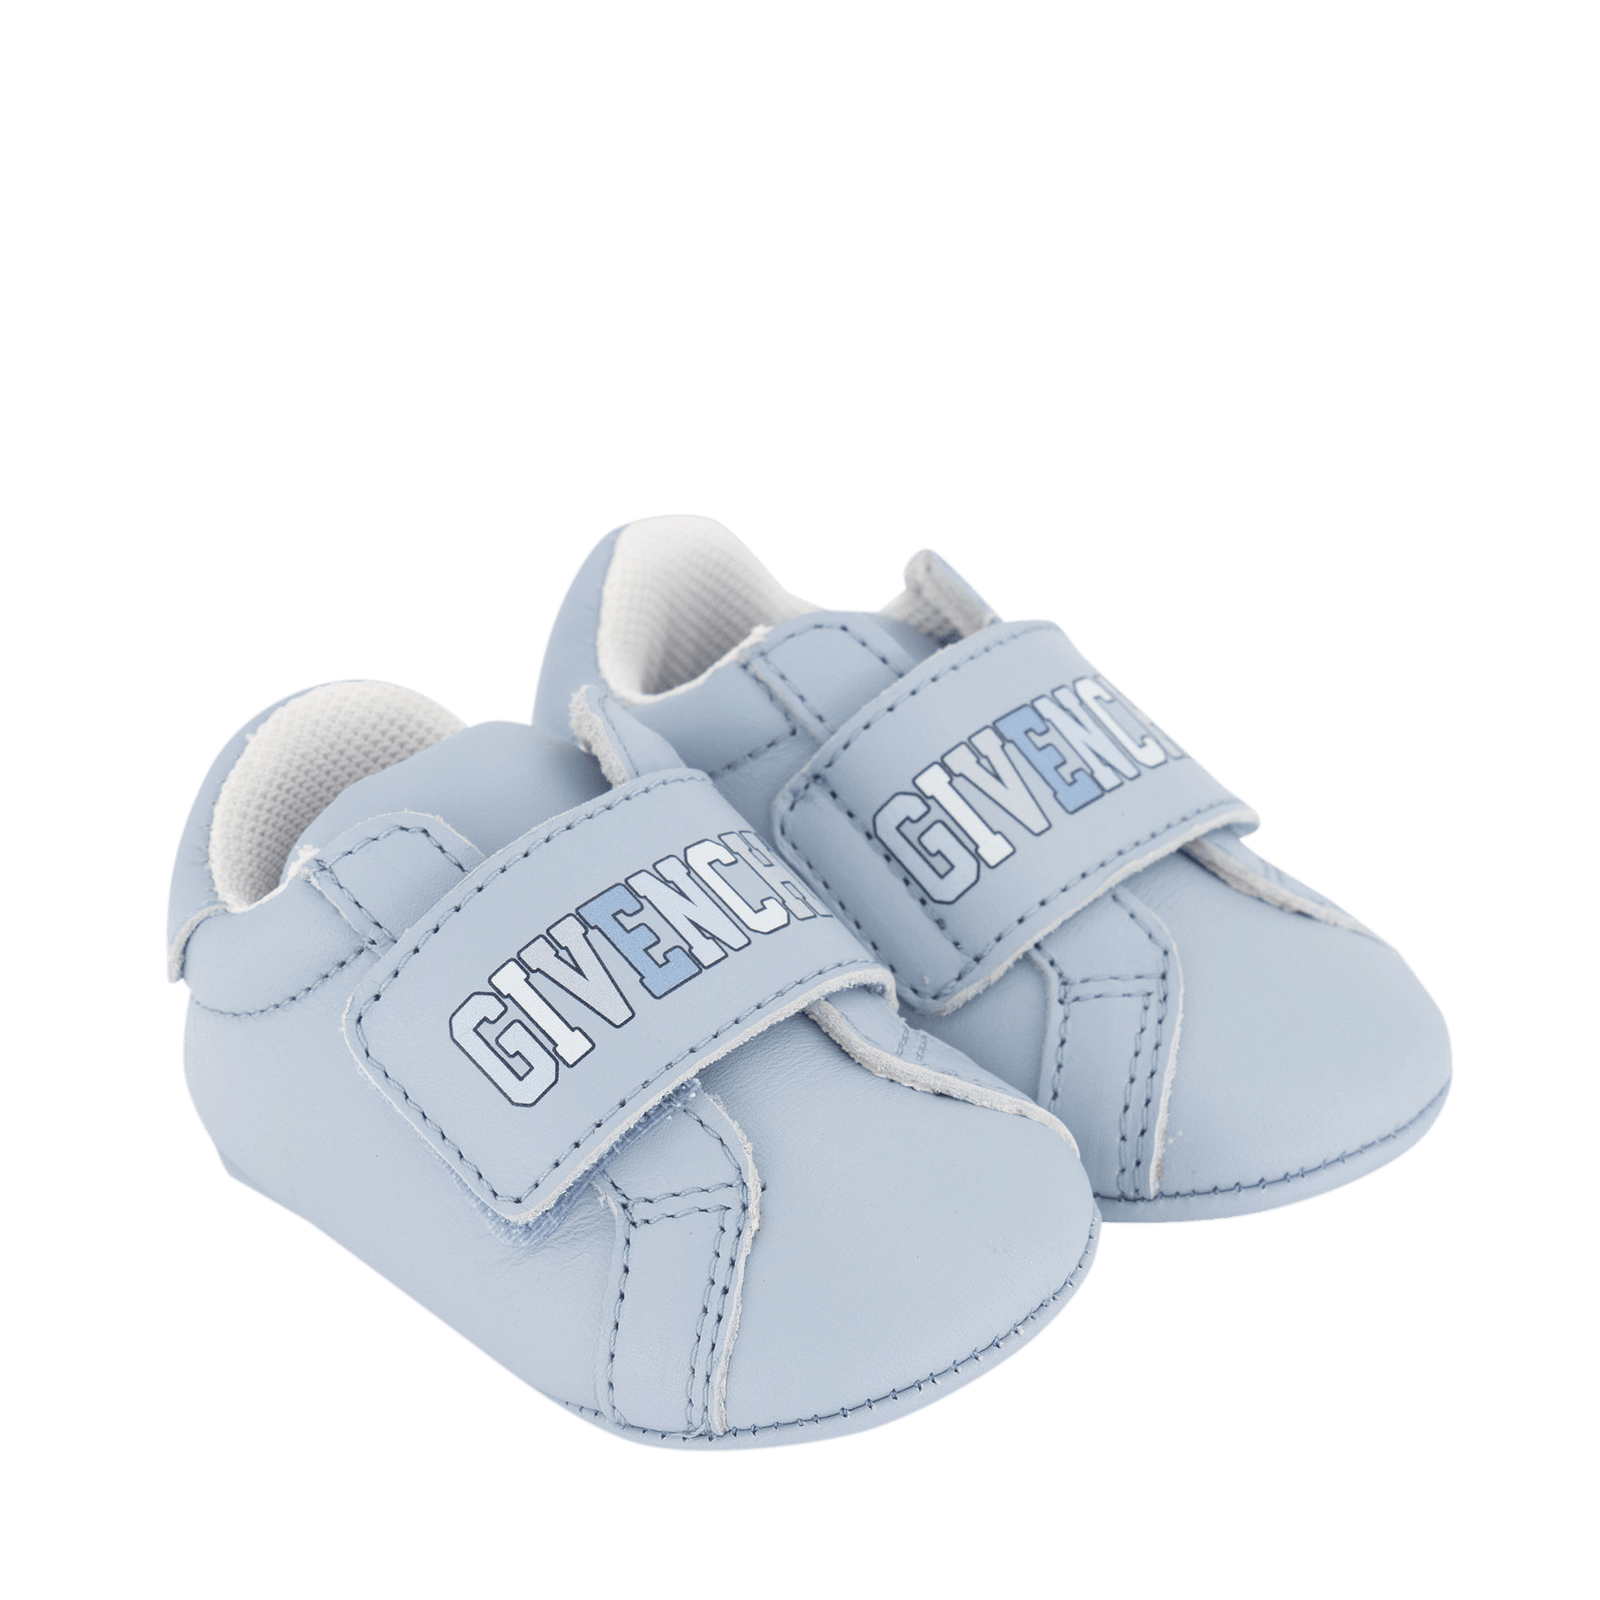 Givenchy Baby Unisex Shoes Light Blue